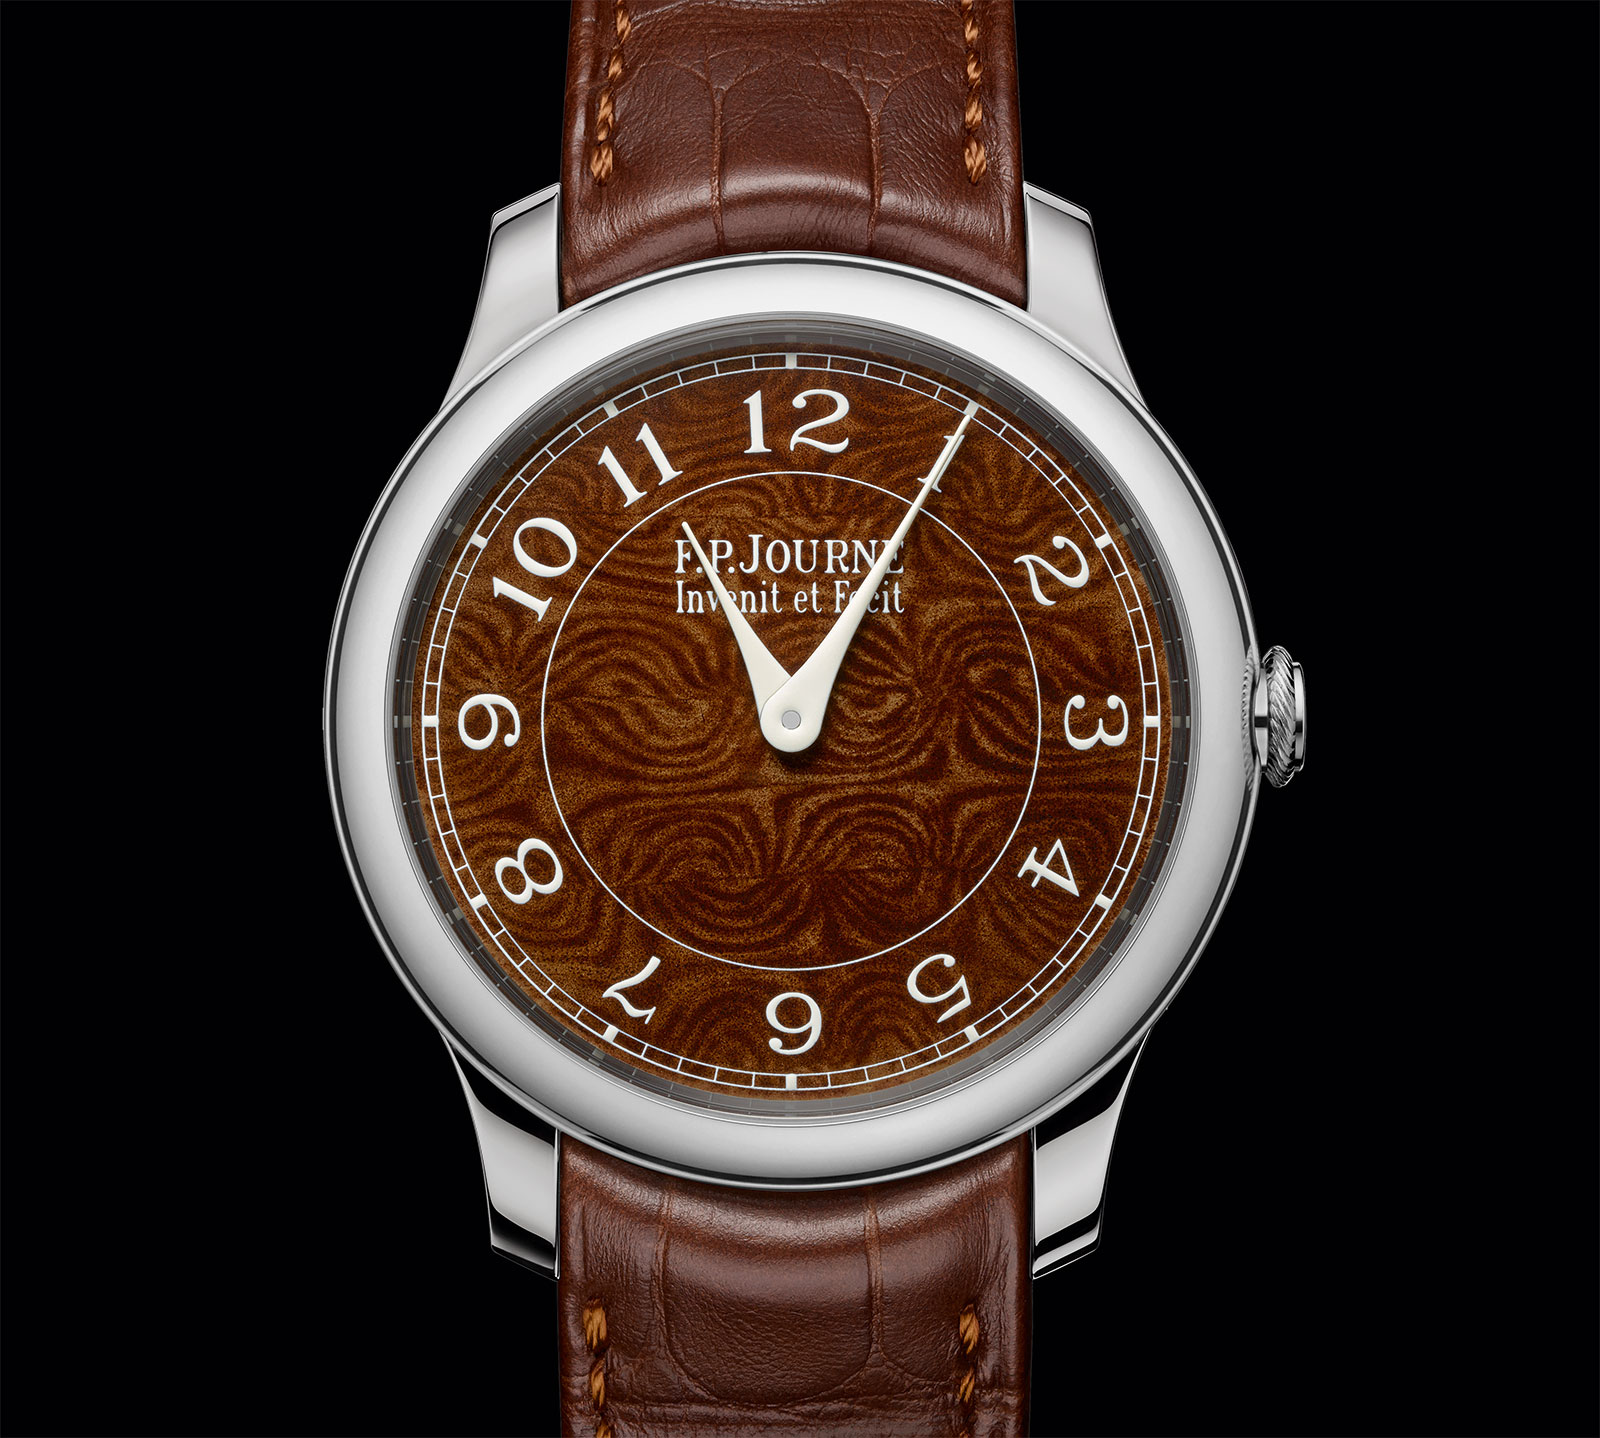 FP Journe Holland and Holland 2